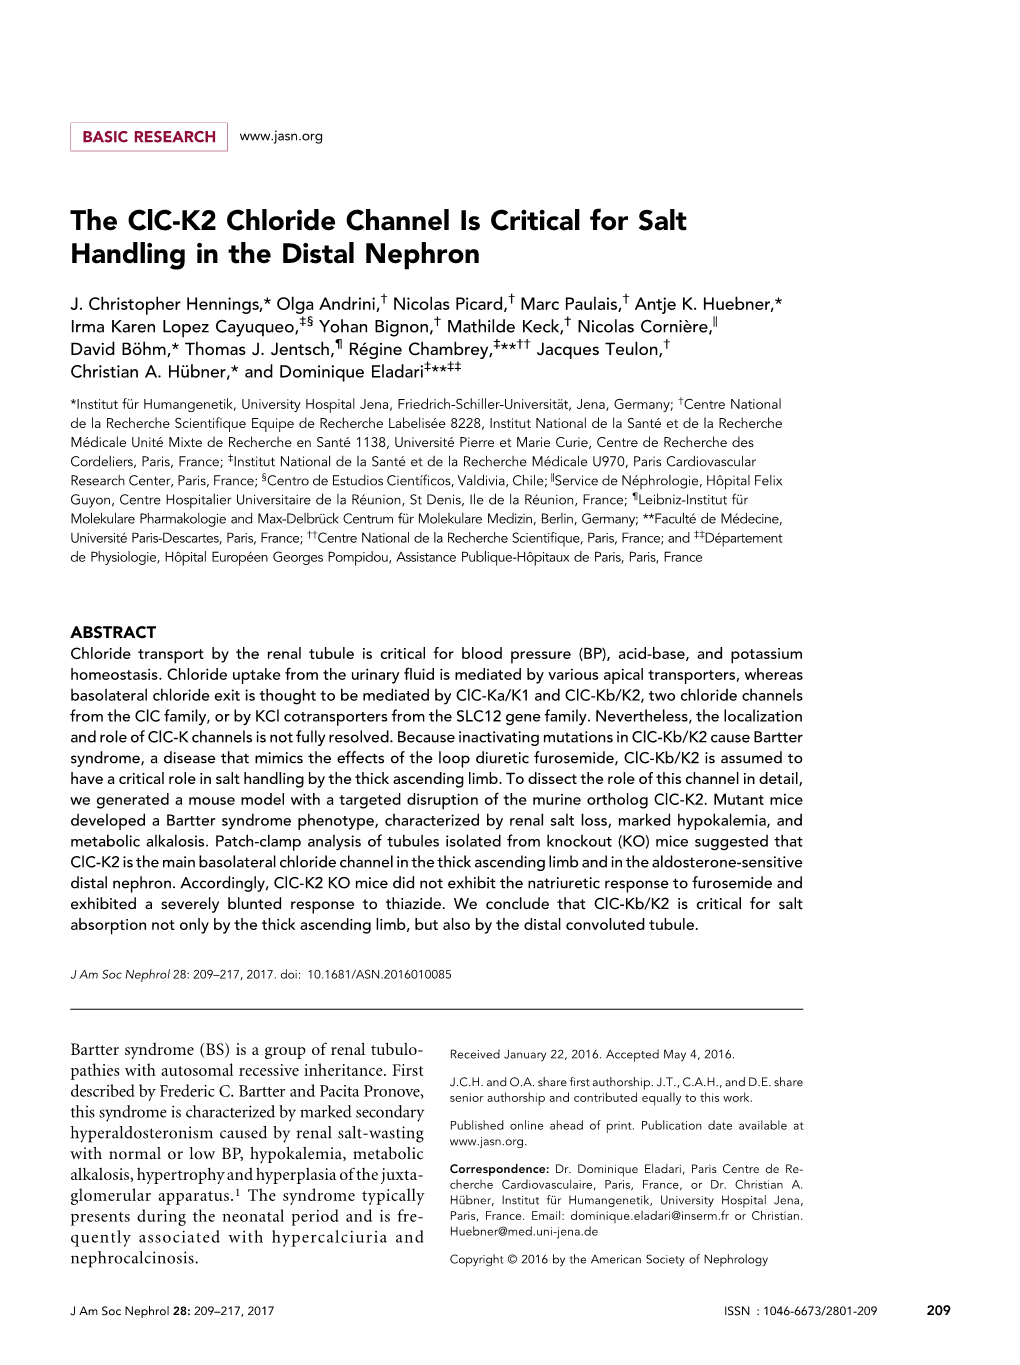 The Clc-K2 Chloride Channel Is Critical for Salt Handling in the Distal Nephron